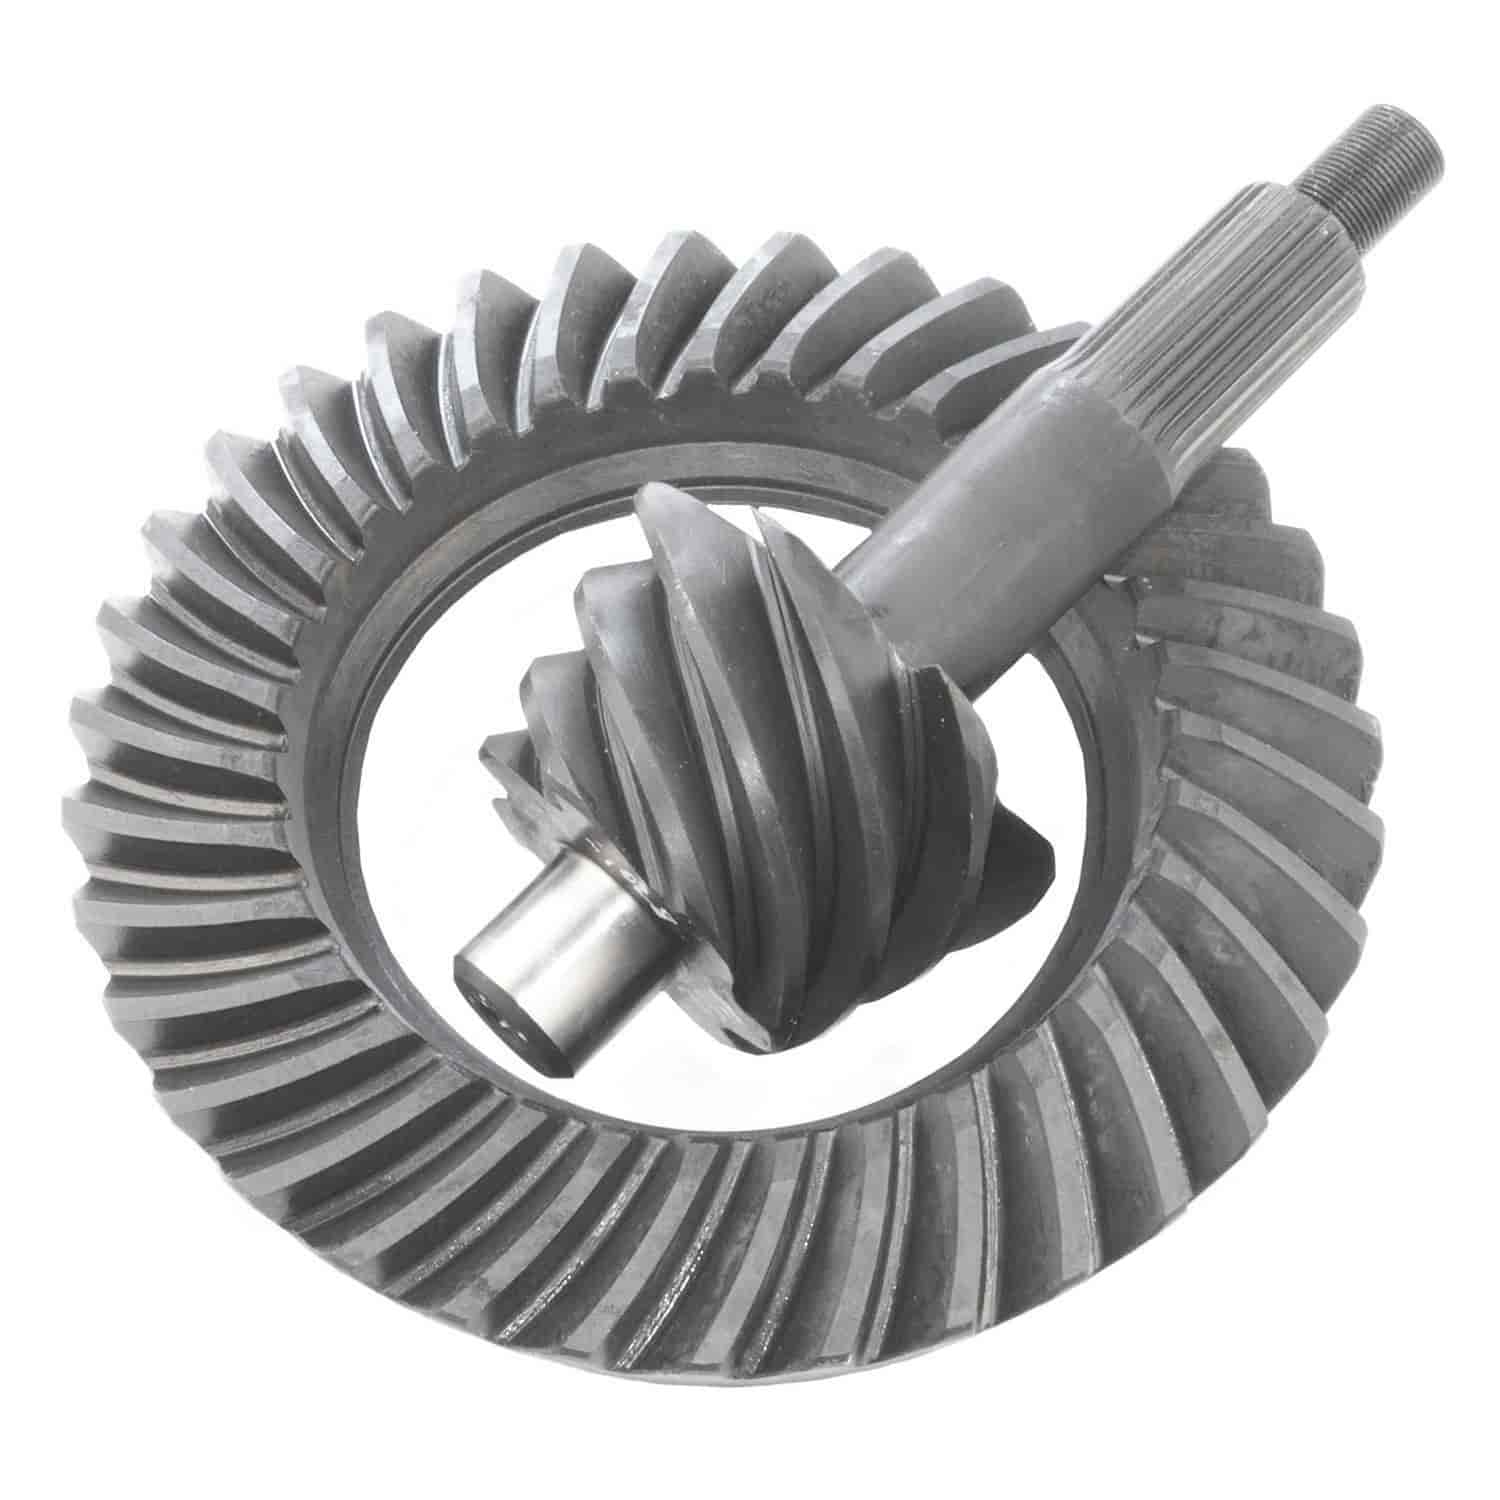 Excel Ring & Pinion Gear Set Ford 9" Ratio: 5.00